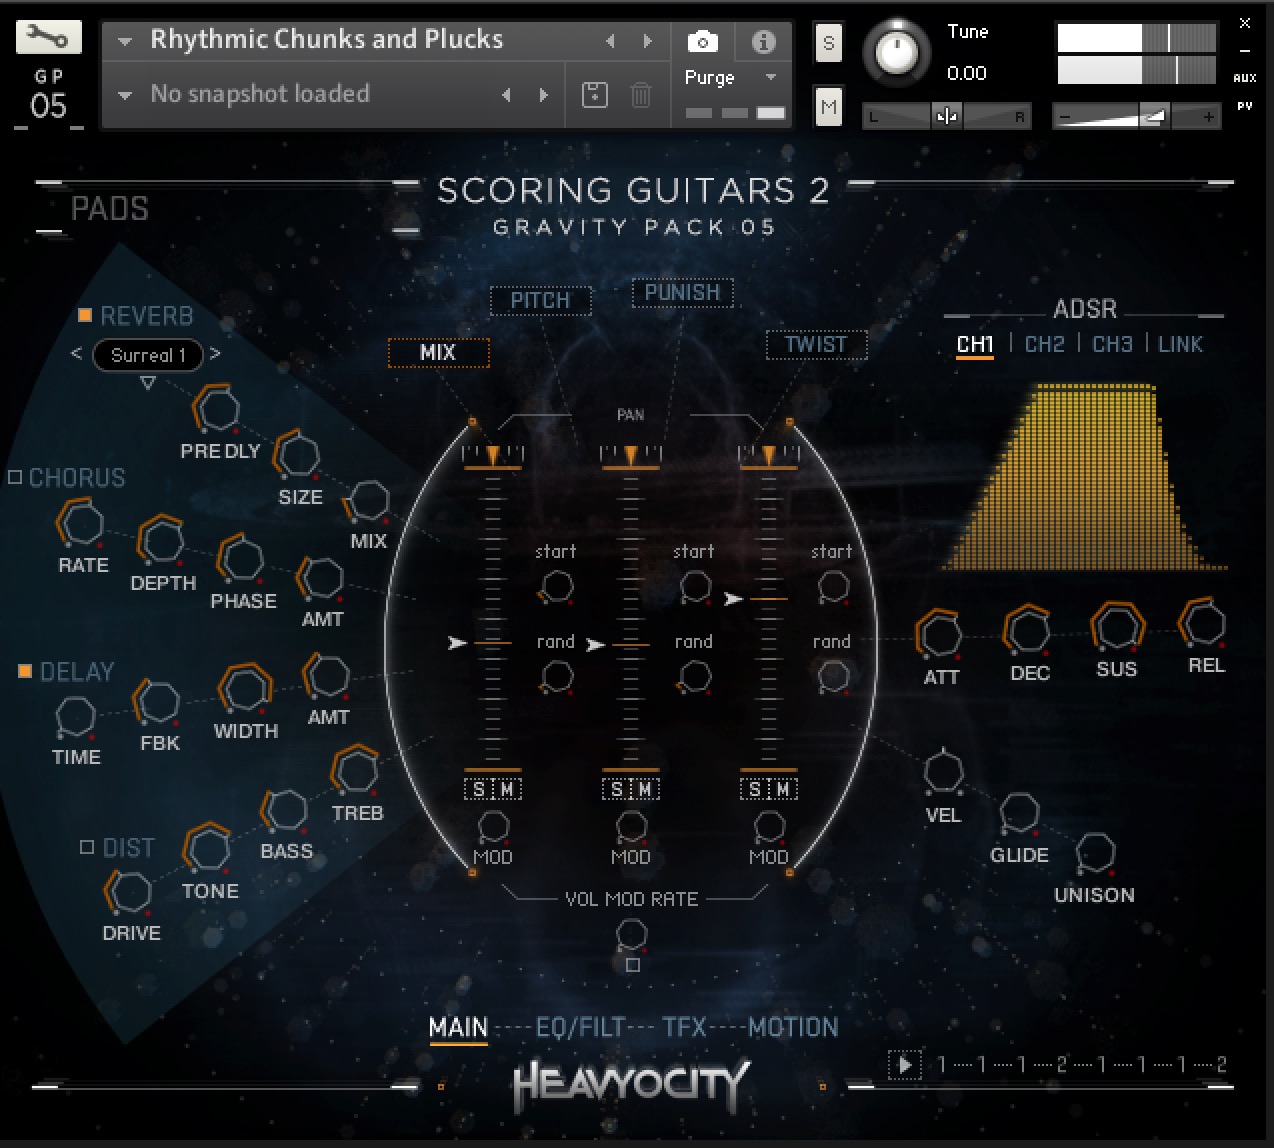 Scoring Guitars 2 by Heavyocity Review